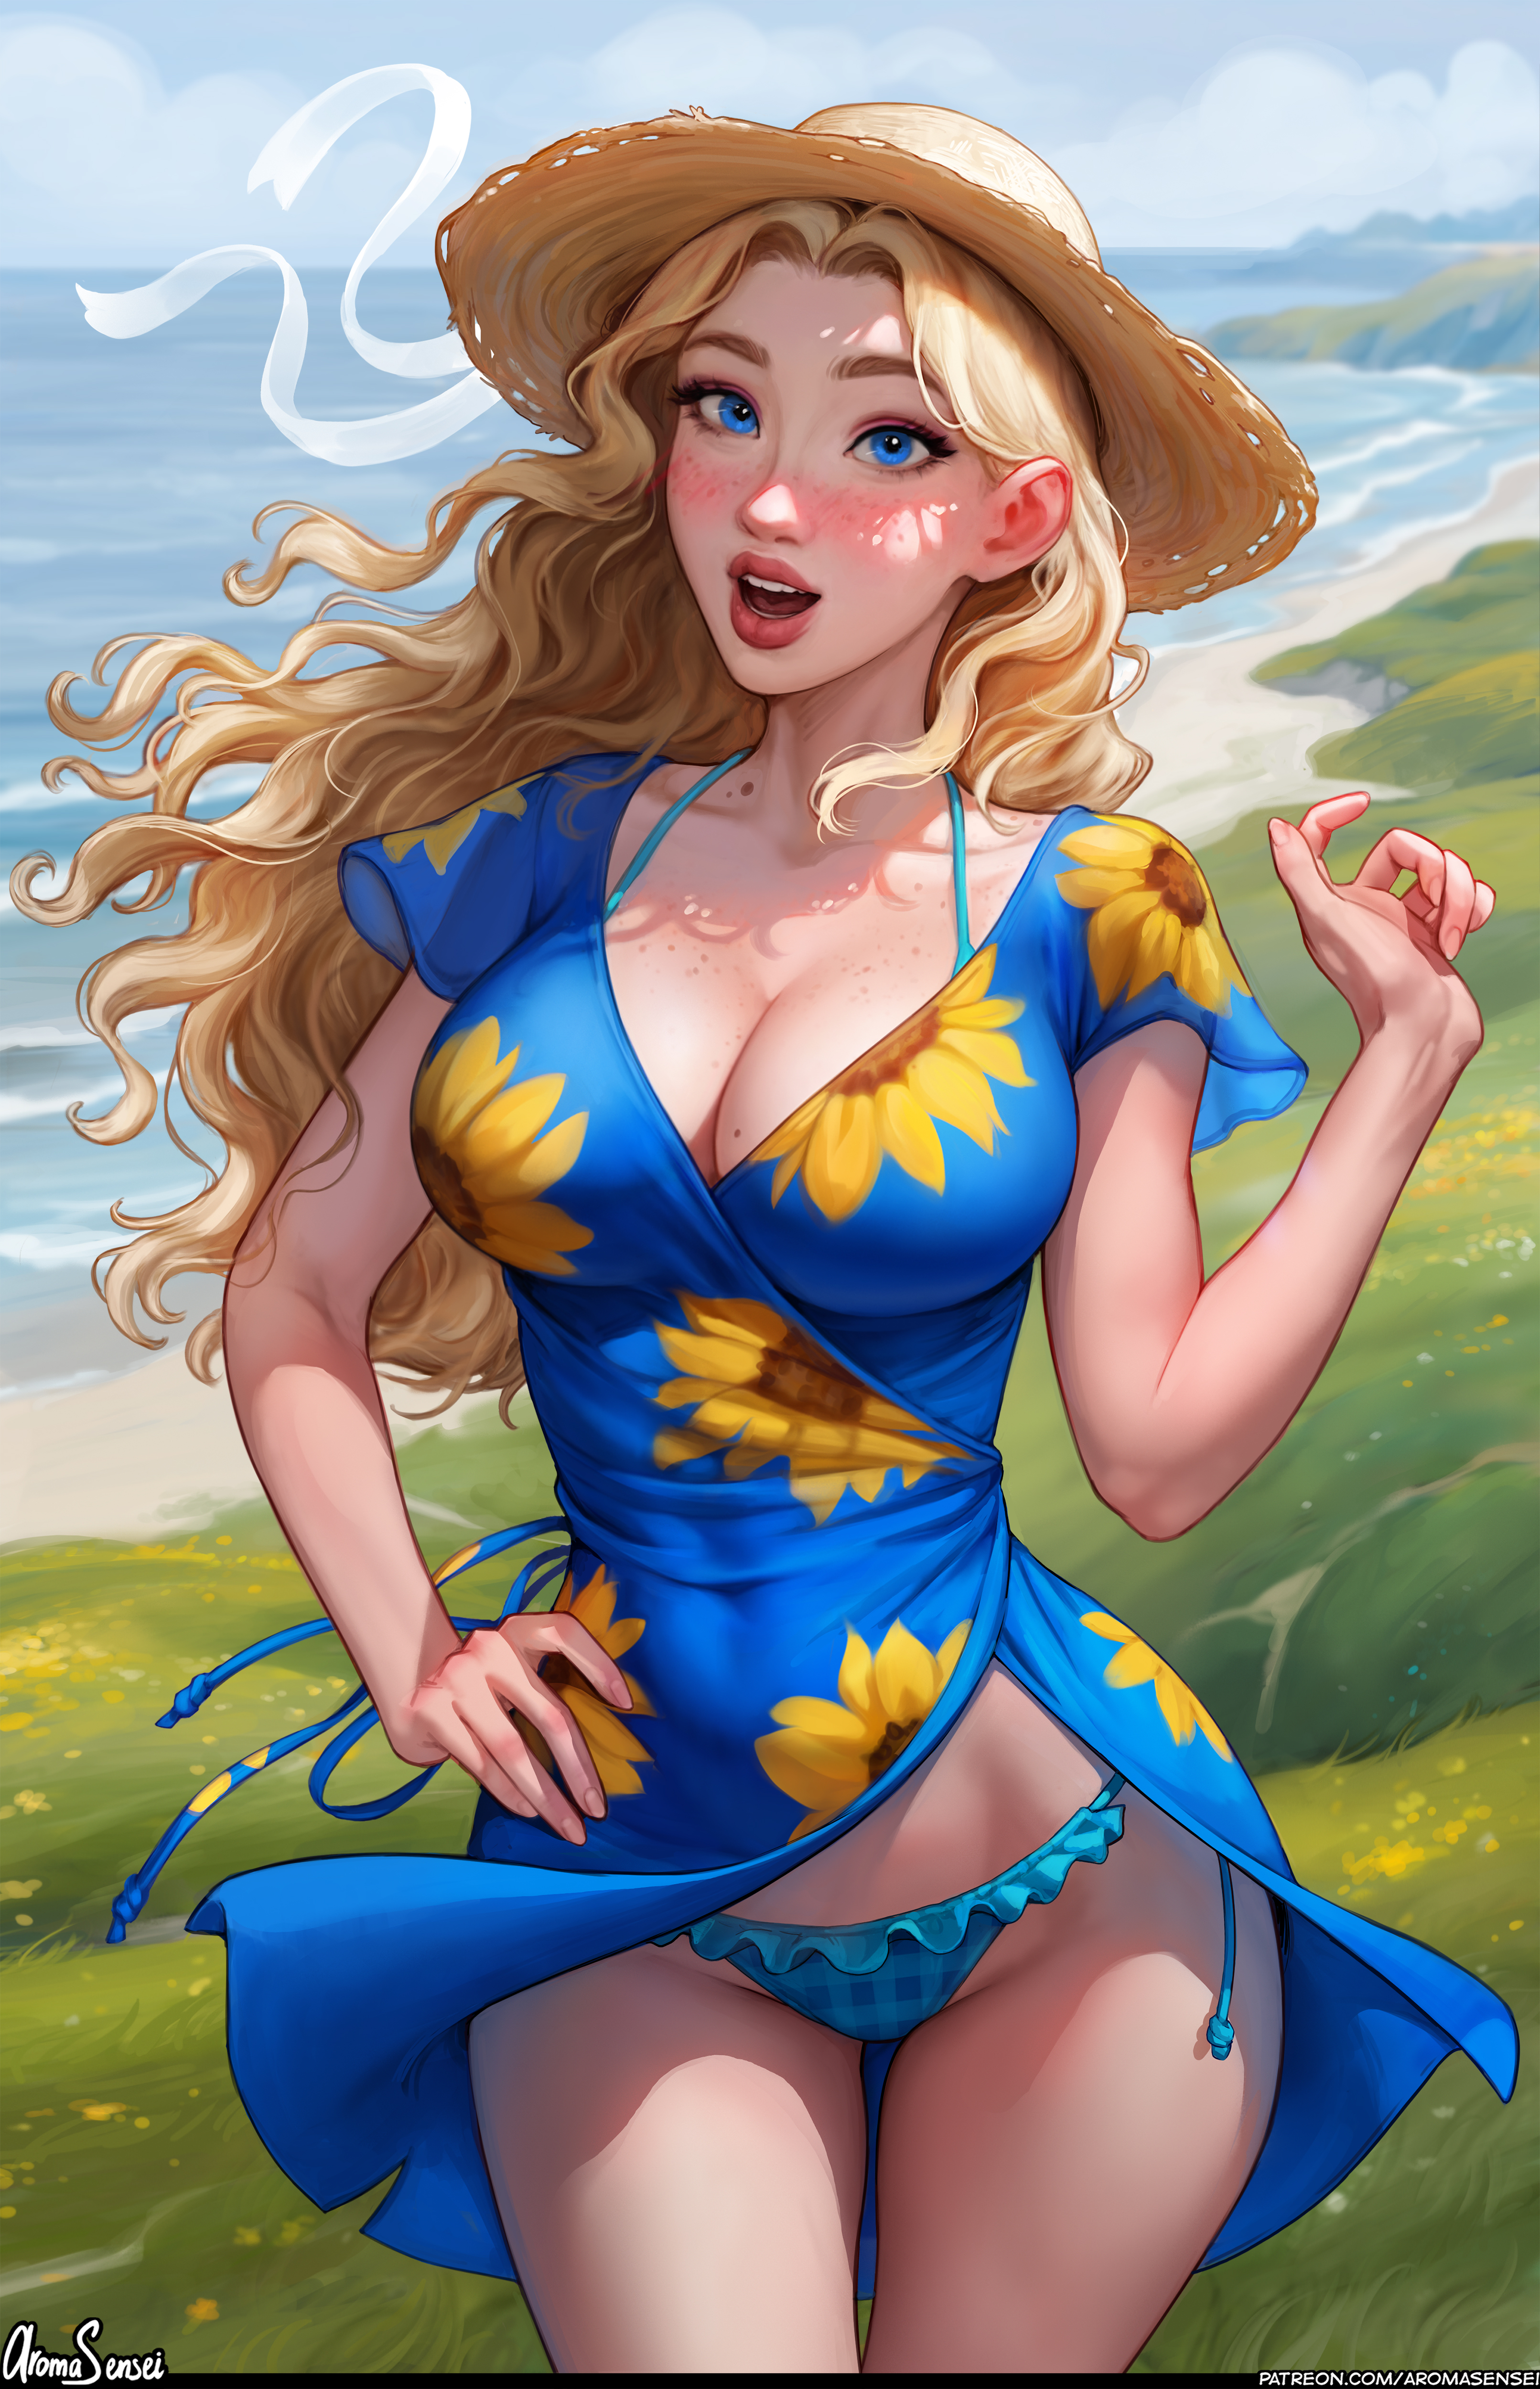 General 3223x5000 Haley (Stardew Valley) Stardew Valley video game girls blonde artwork drawing fan art Aroma Sensei upskirt dress blue eyes big boobs hat women with hats standing cleavage outdoors women outdoors video games sunlight collarbone long hair signature water looking at viewer skinny hair blowing in the wind wind portrait display